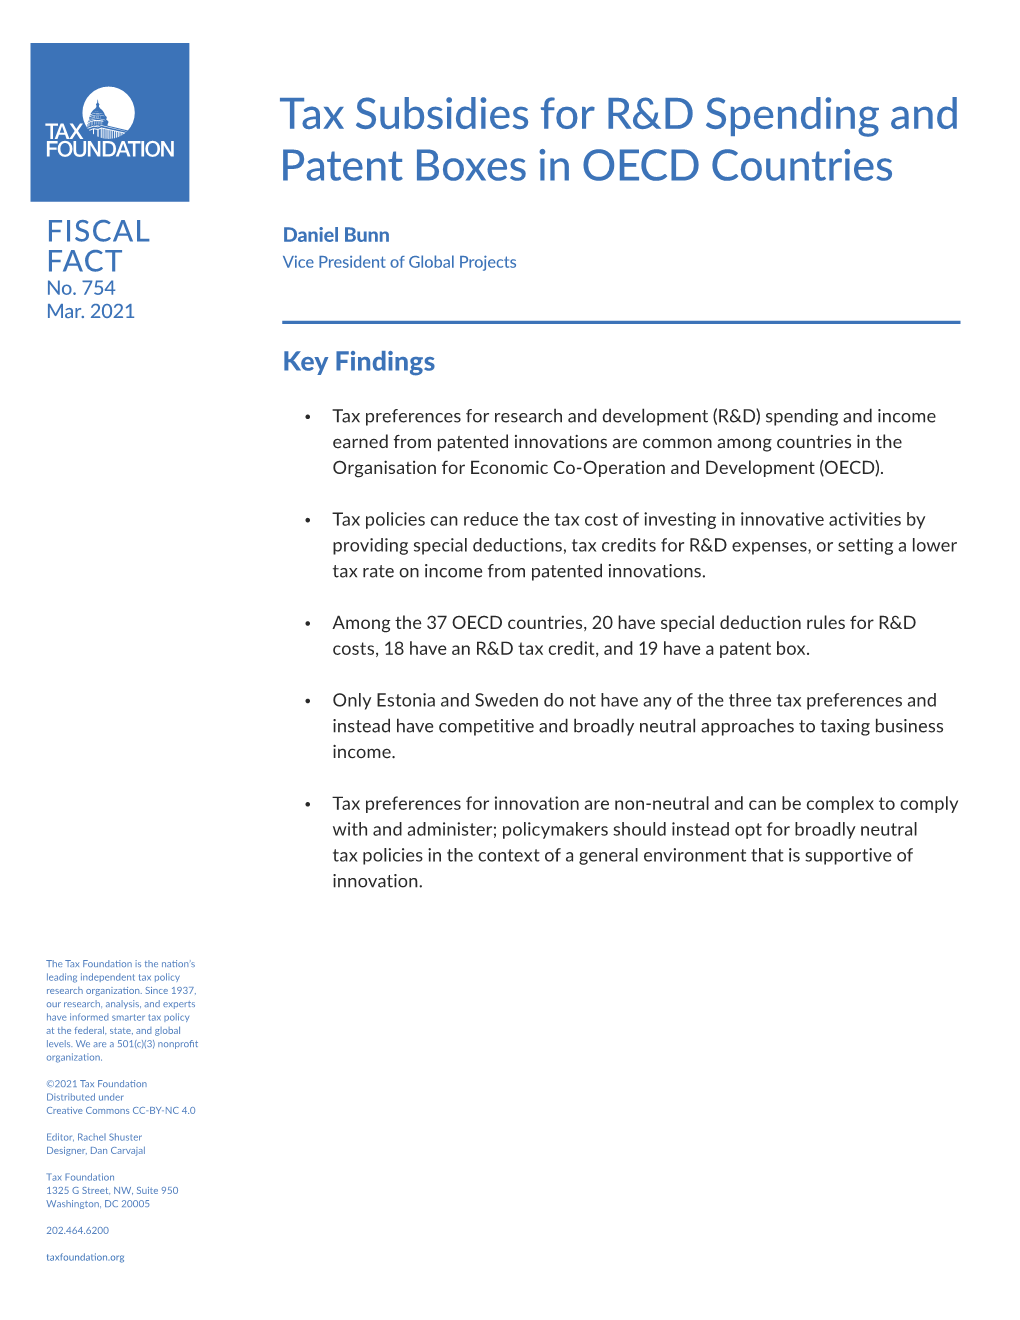 Tax Subsidies for R&D Spending and Patent Boxes in OECD Countries